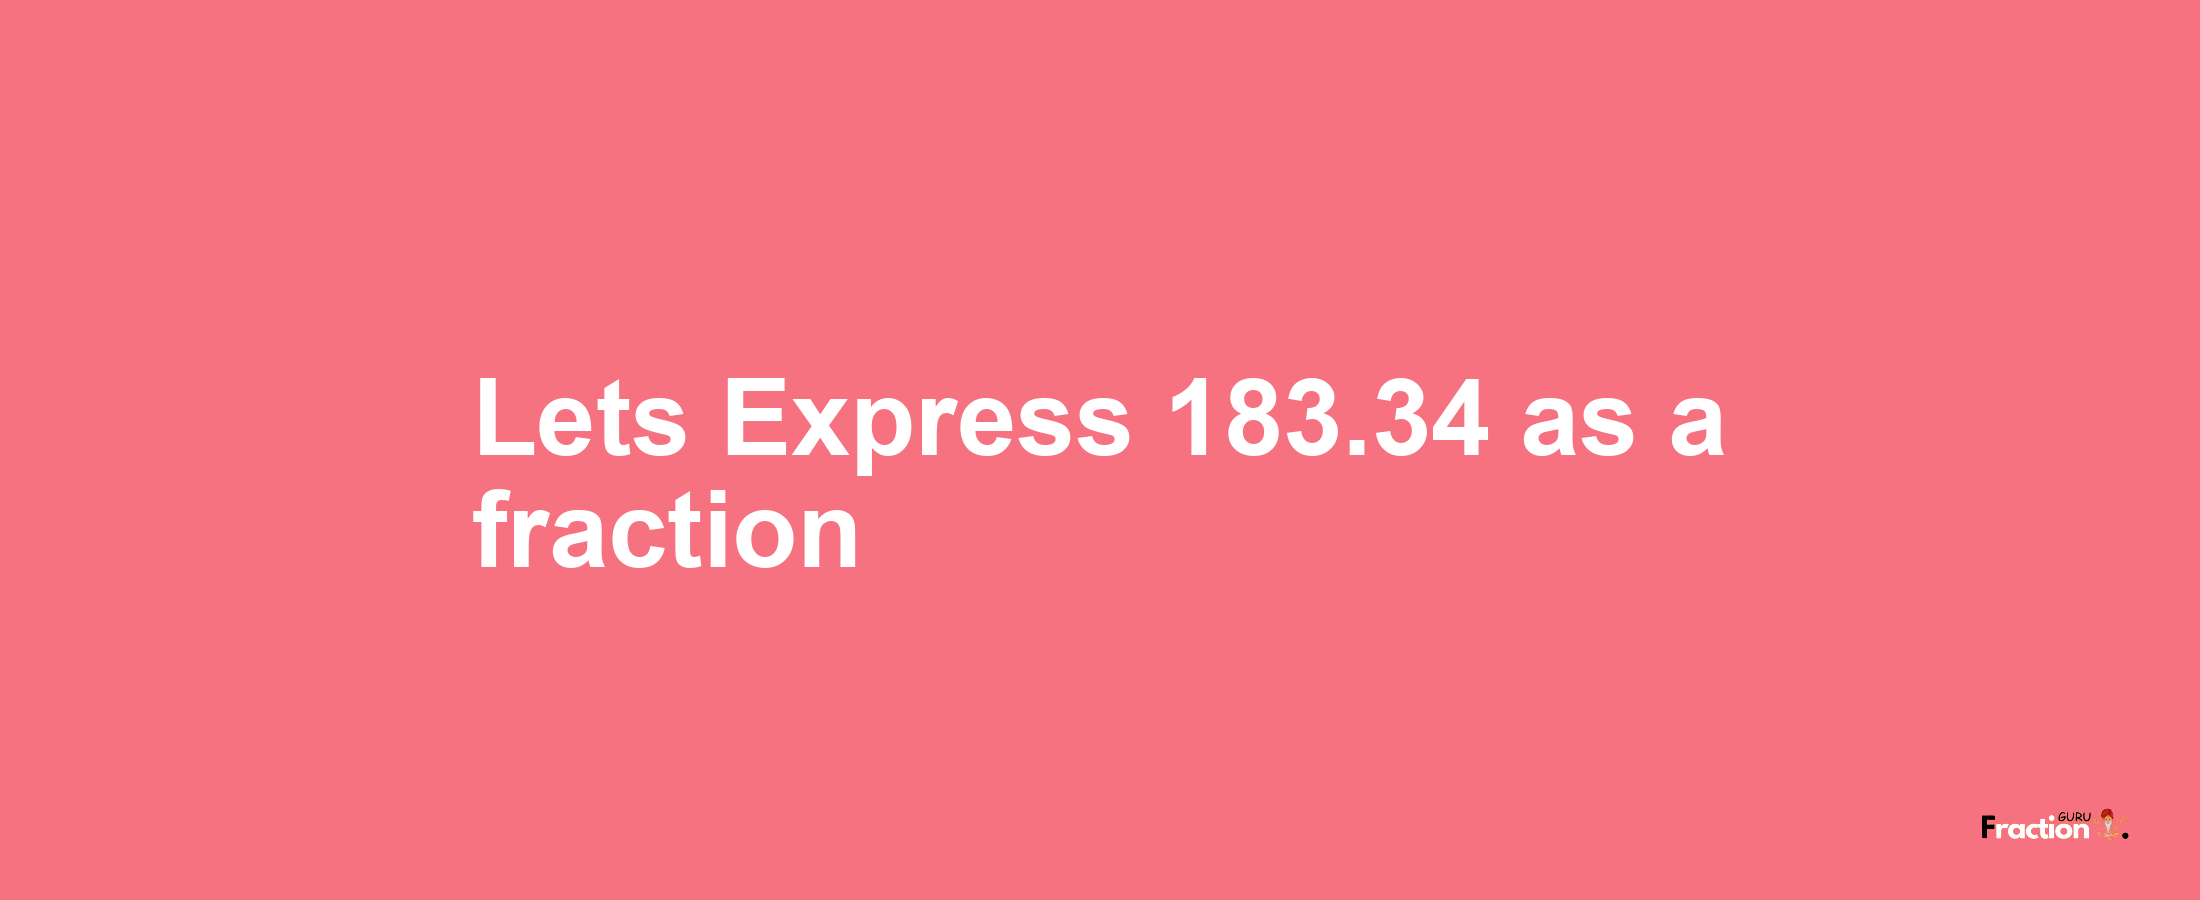 Lets Express 183.34 as afraction